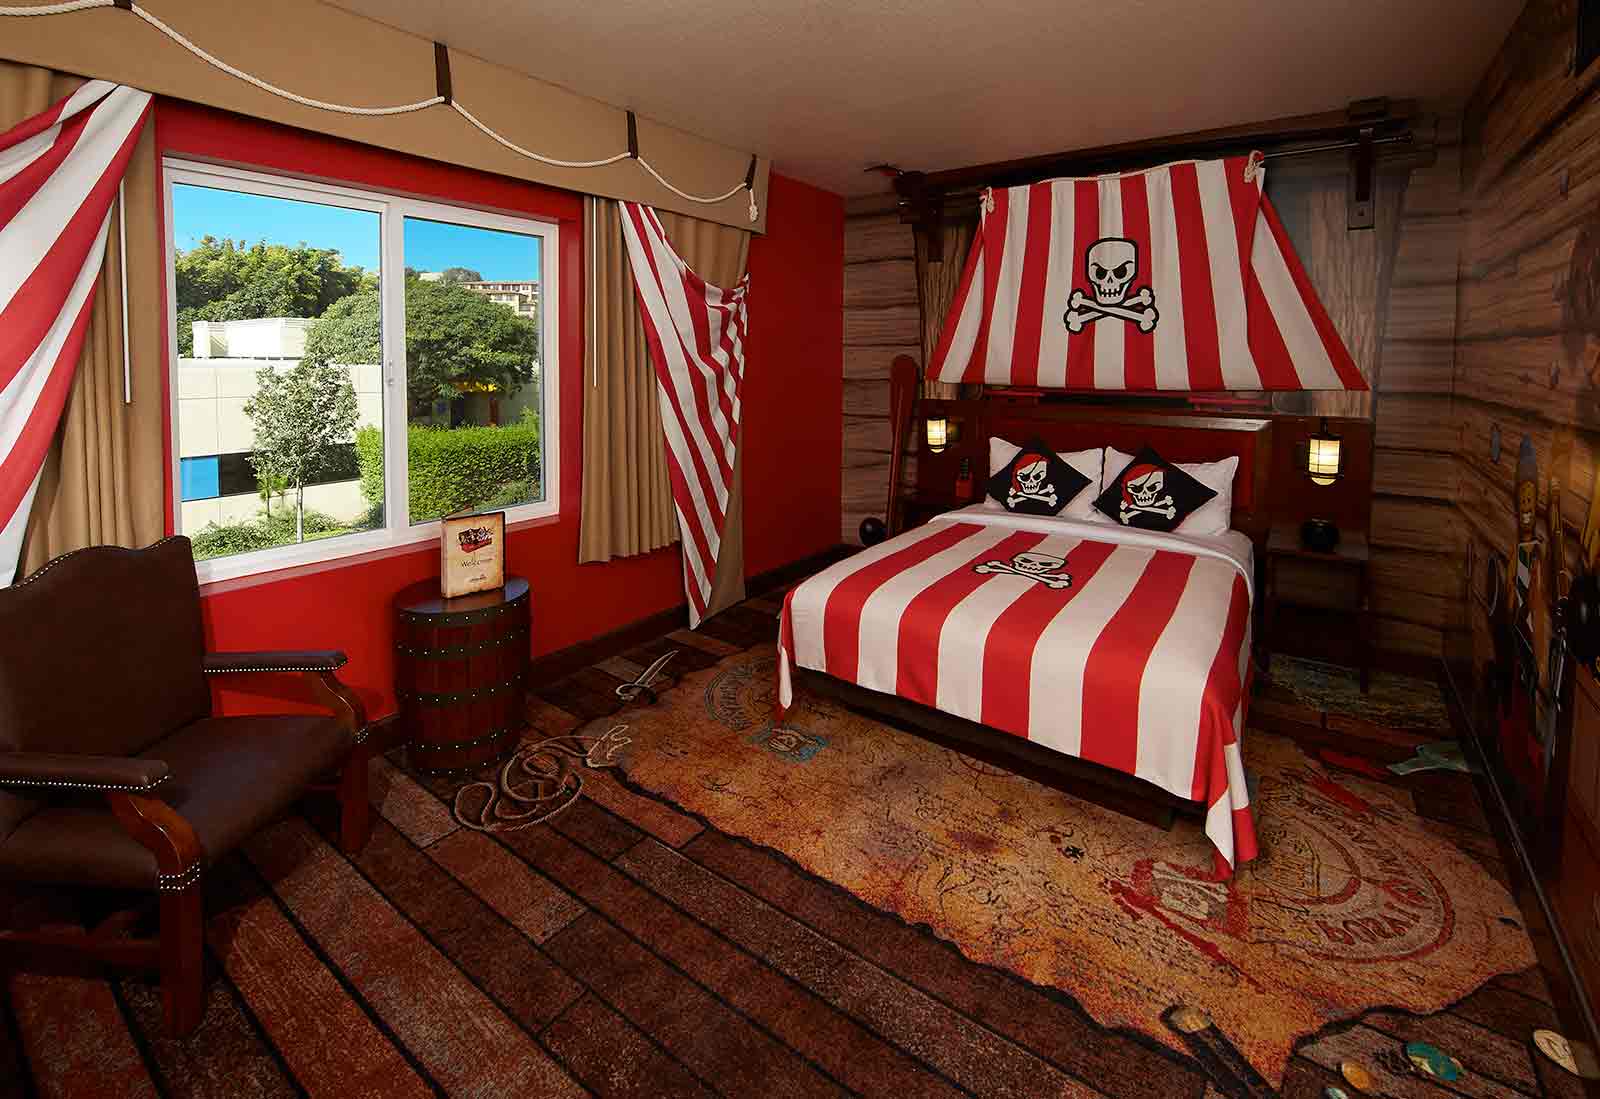 Pirate Fully Themed Hotel Room - Adult Sleeping Area